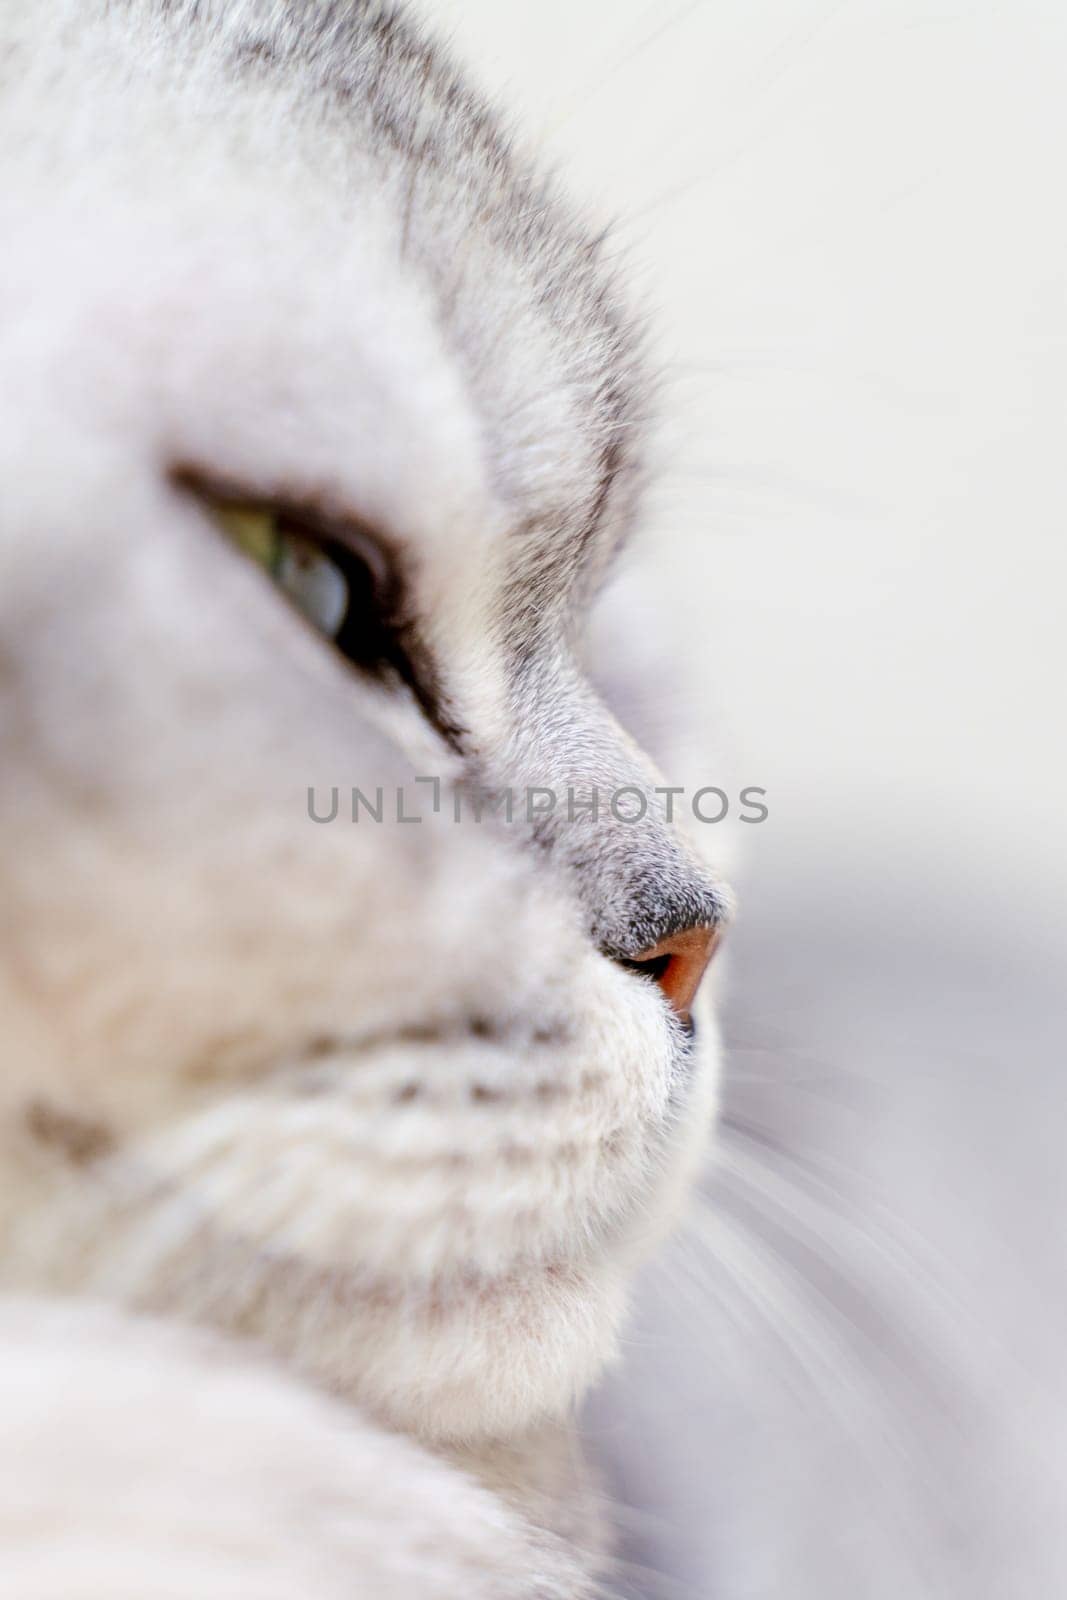 Close-up of a cat's muzzle. Scottish cat with green eyes. by Matiunina